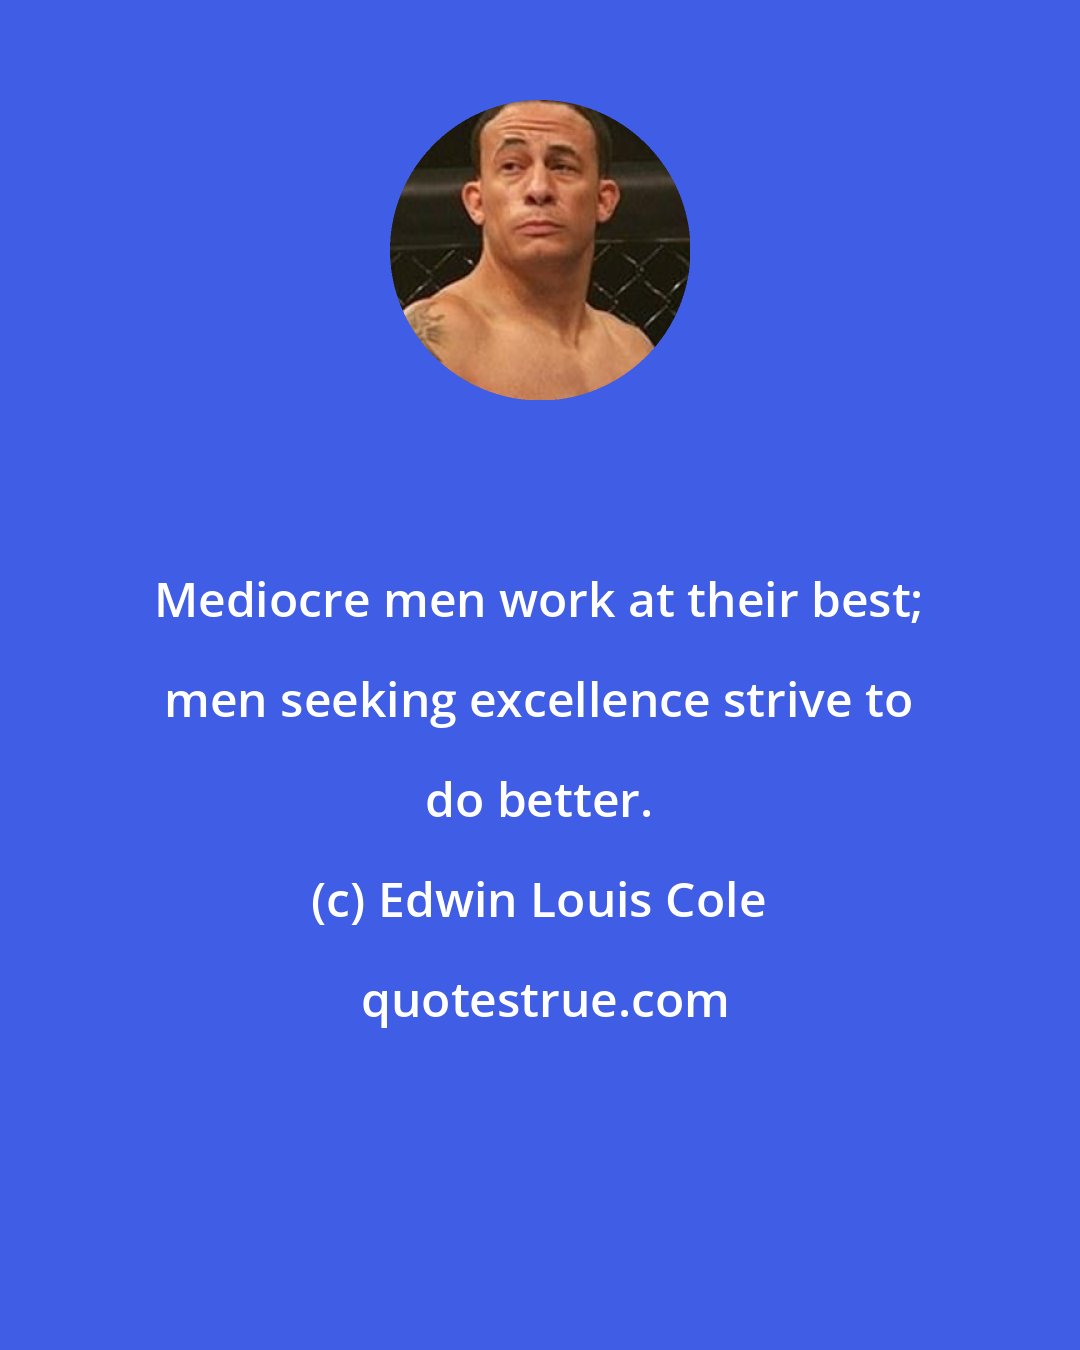 Edwin Louis Cole: Mediocre men work at their best; men seeking excellence strive to do better.